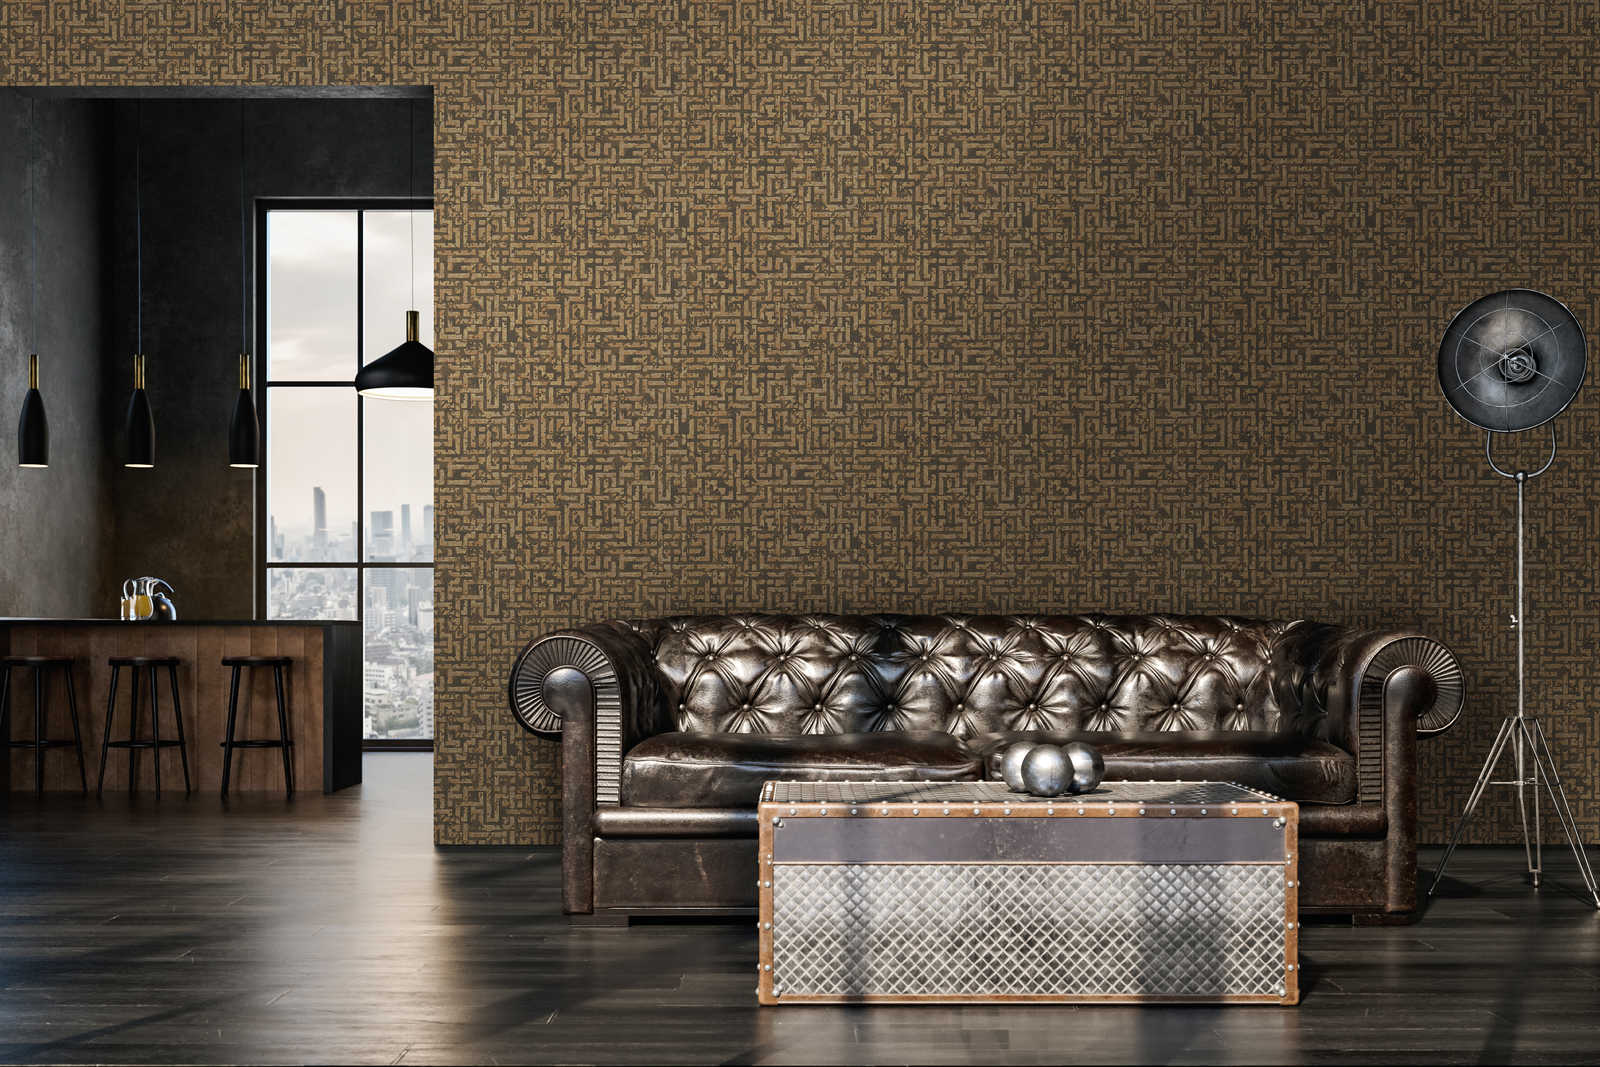             Ethno pattern wallpaper with used design & relief graphics - Brown, Metallic
        